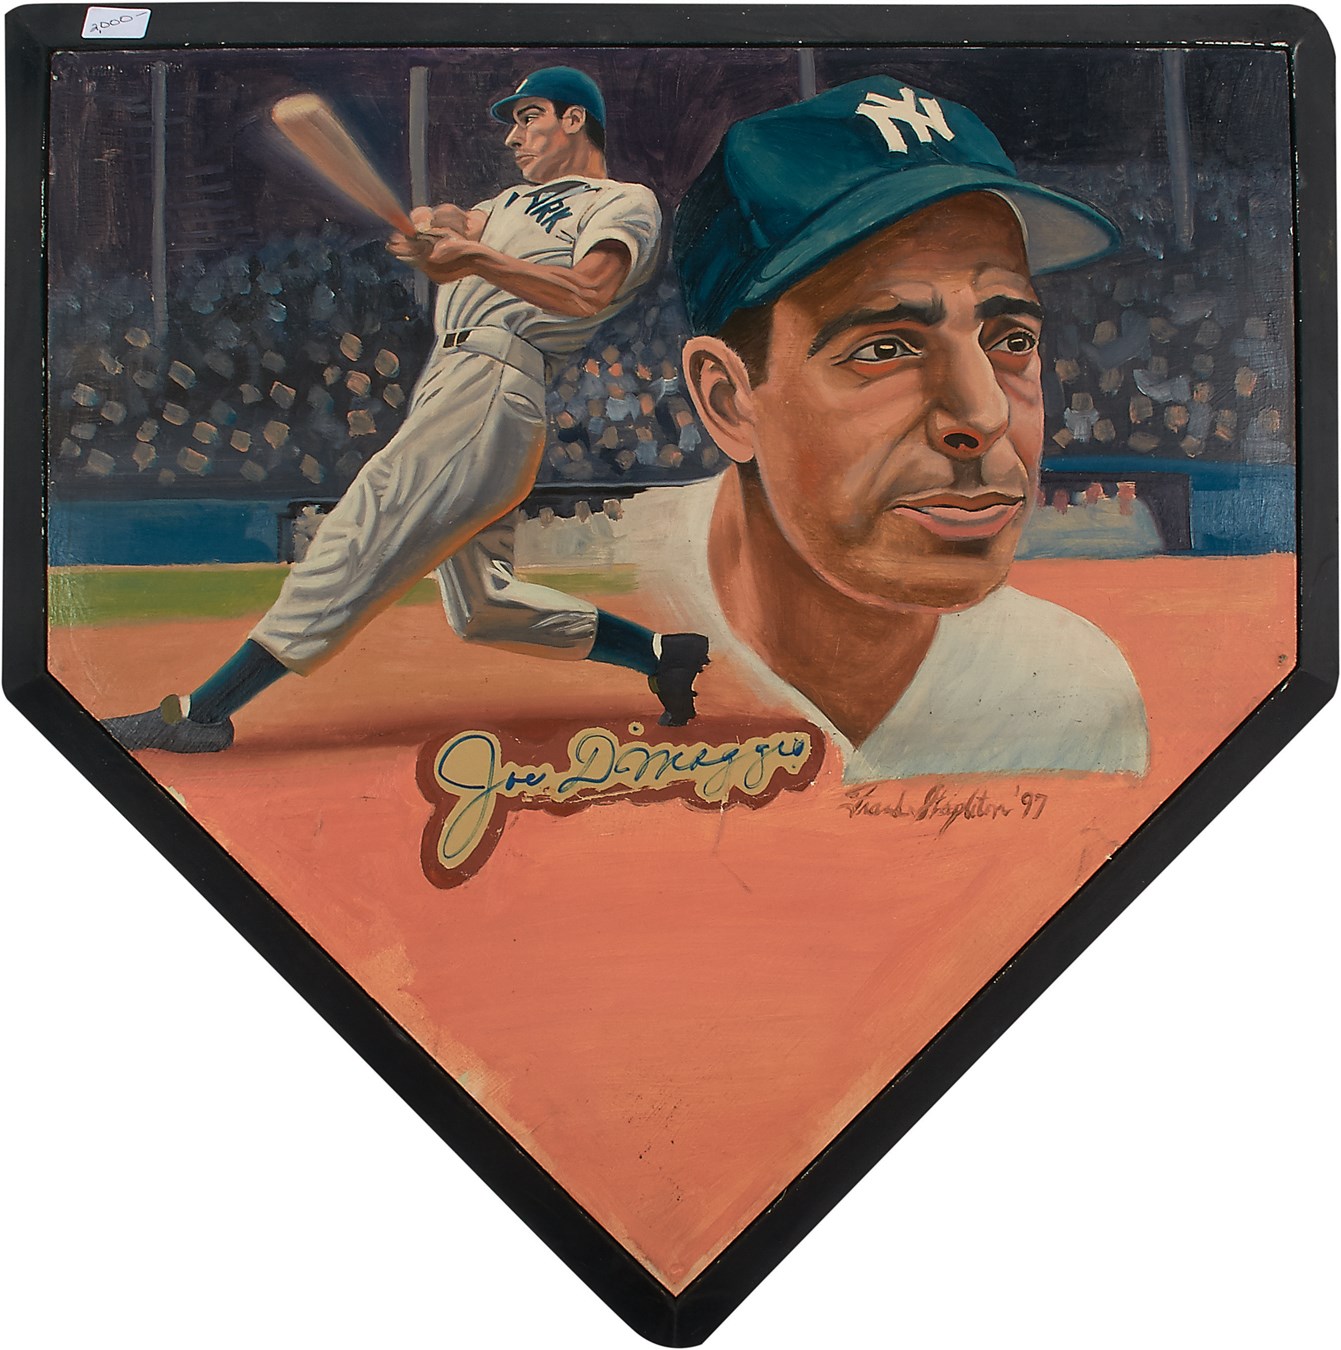 NY Yankees, Giants & Mets - Joe DiMaggio Signed Oil Painting on Home Plate by Frank Stapleton (JSA)